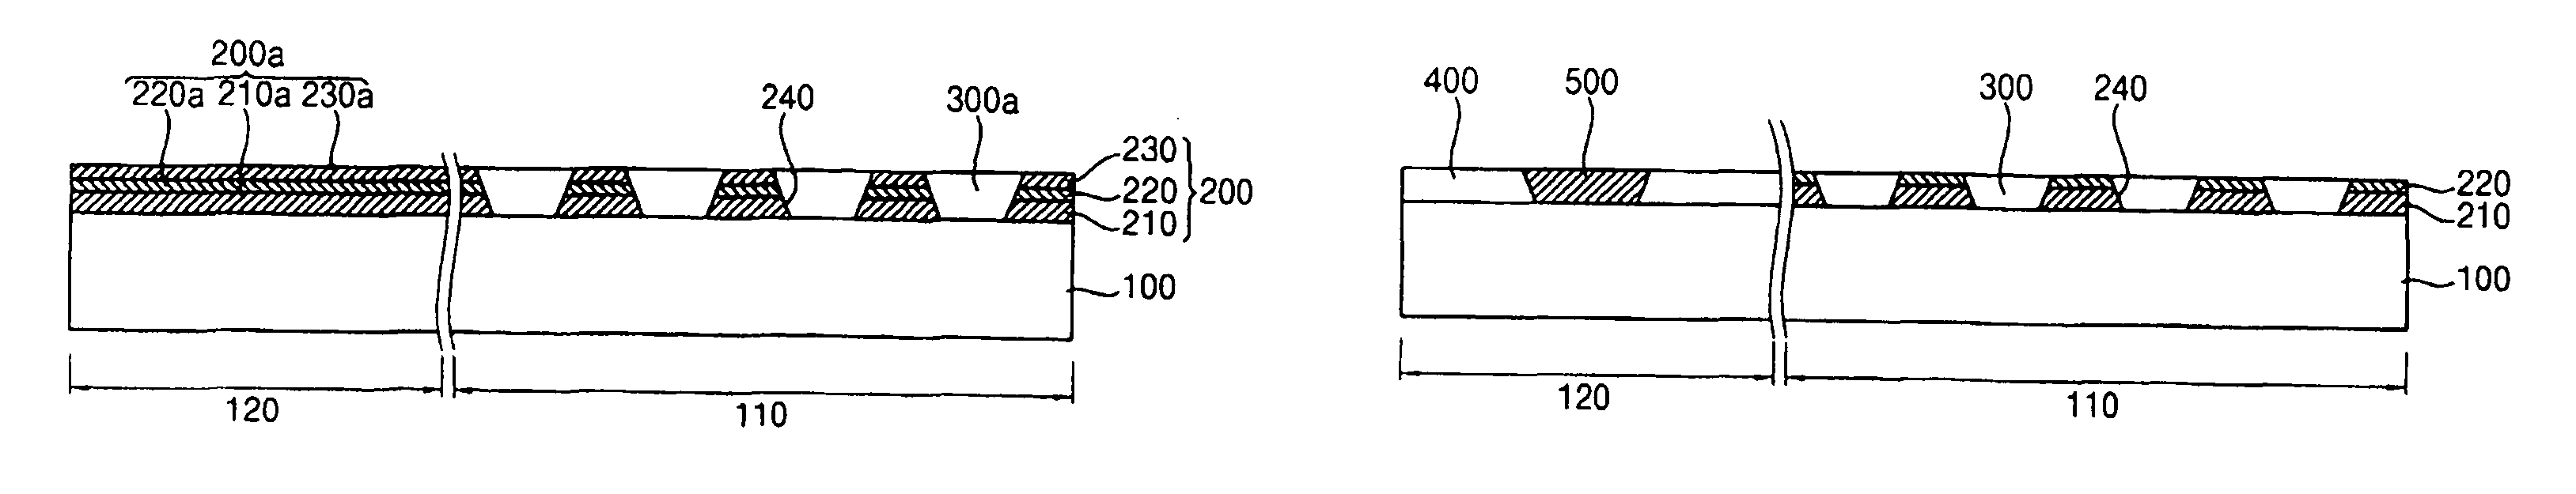 Method of manufacturing a semiconductor device including forming a single-crystalline semiconductor material in a first area and forming a second device isolation pattern on a second area